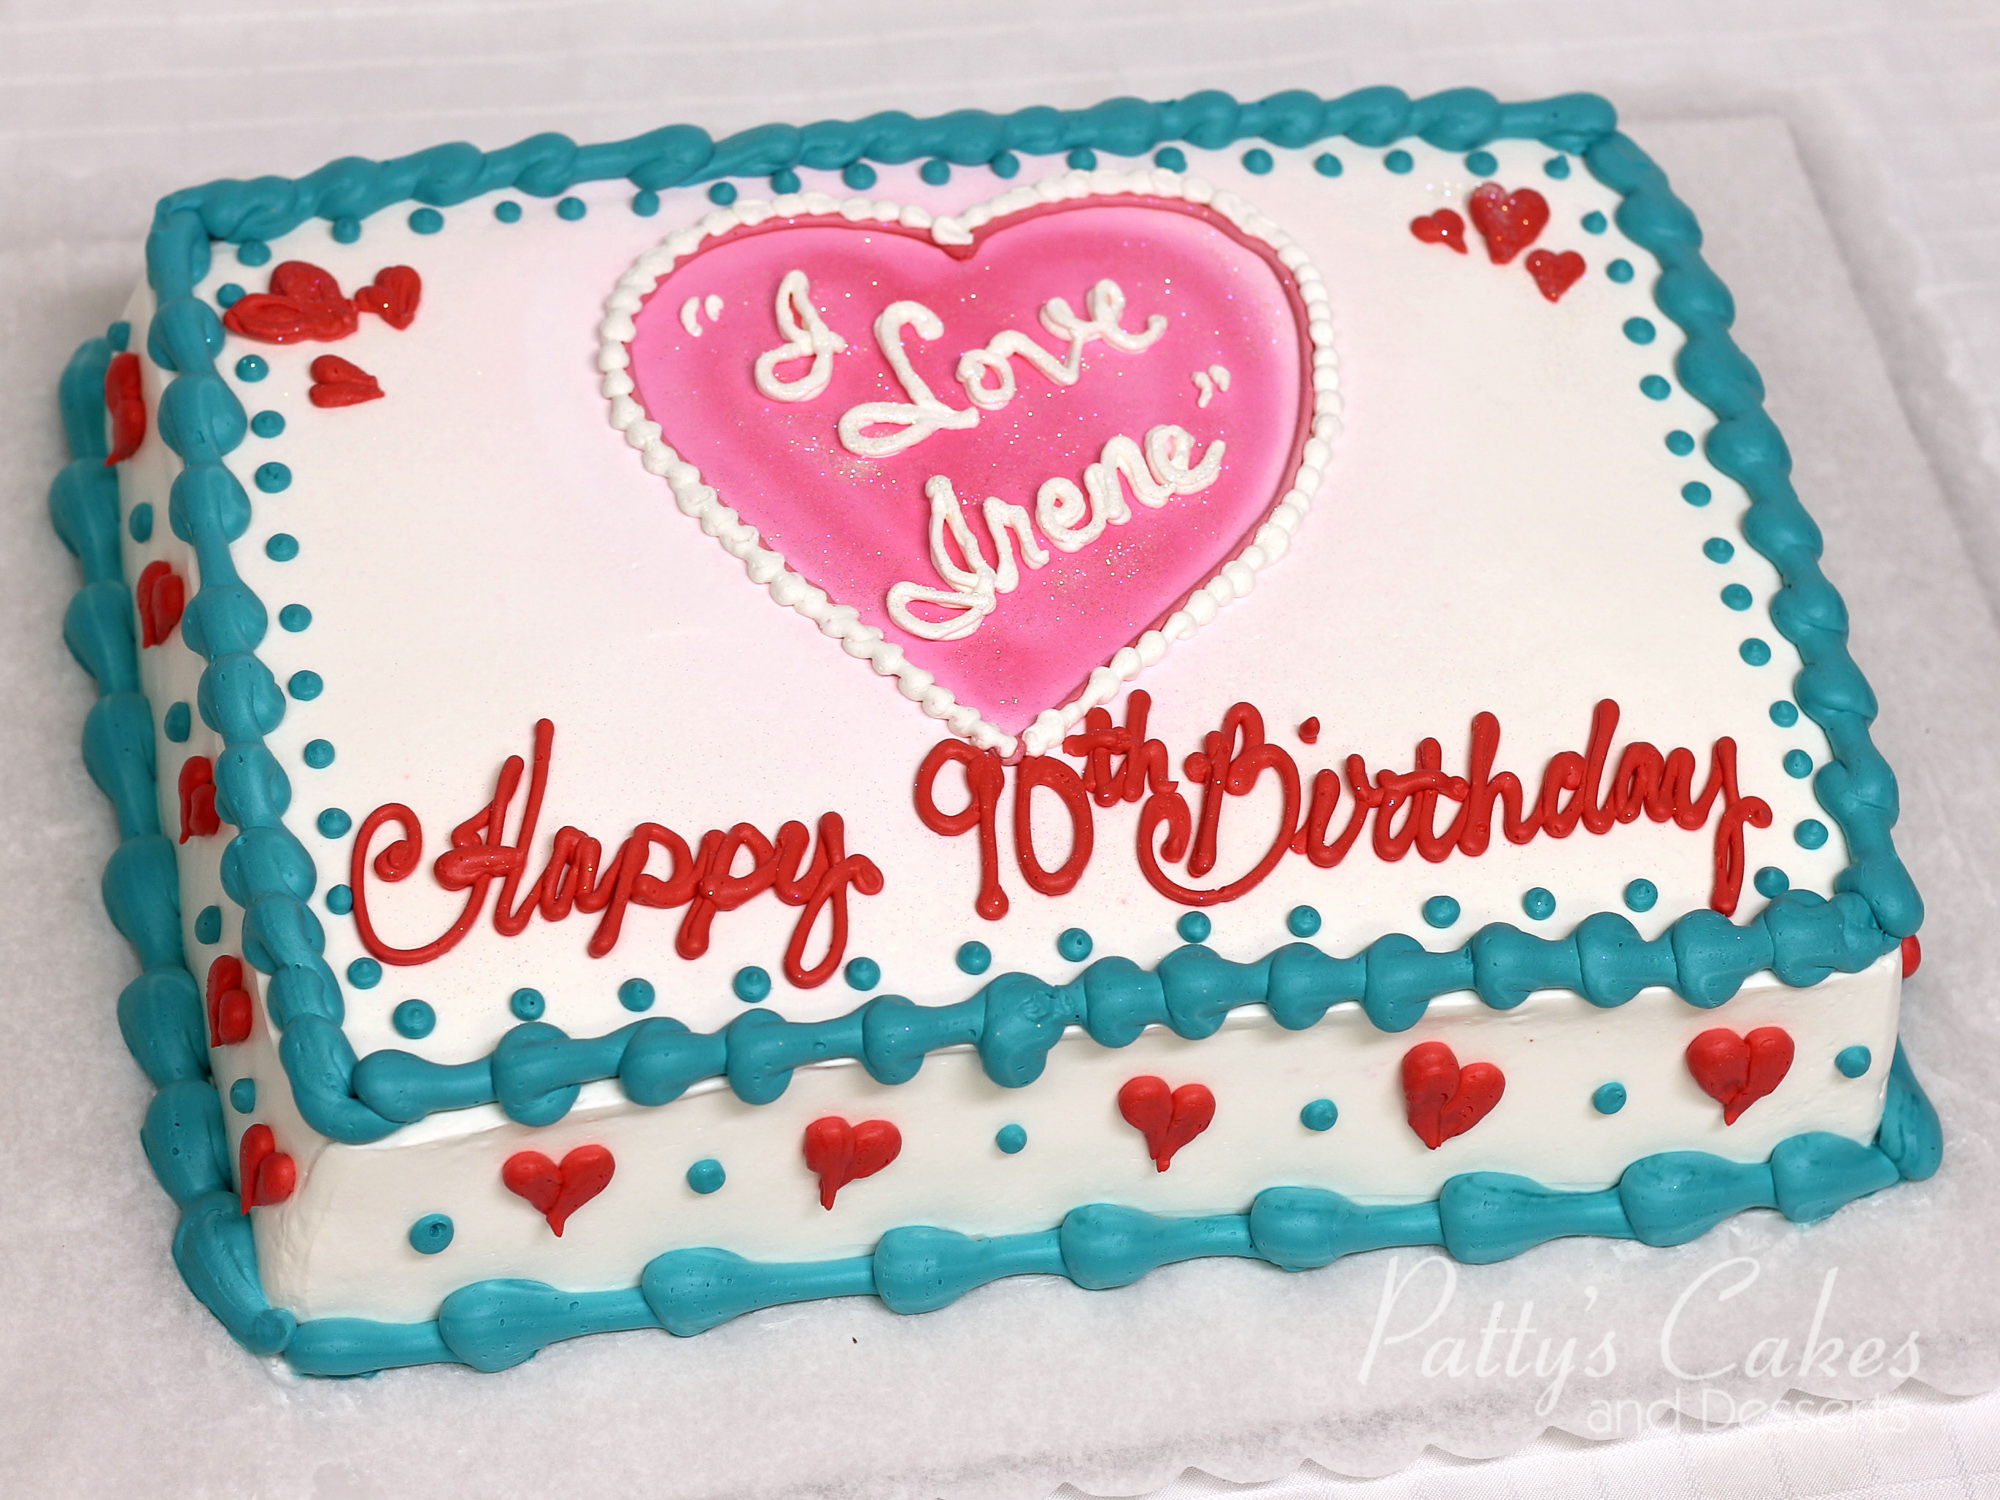 Photo of a i love lucy birthday cake - Patty's Cakes and Desserts.